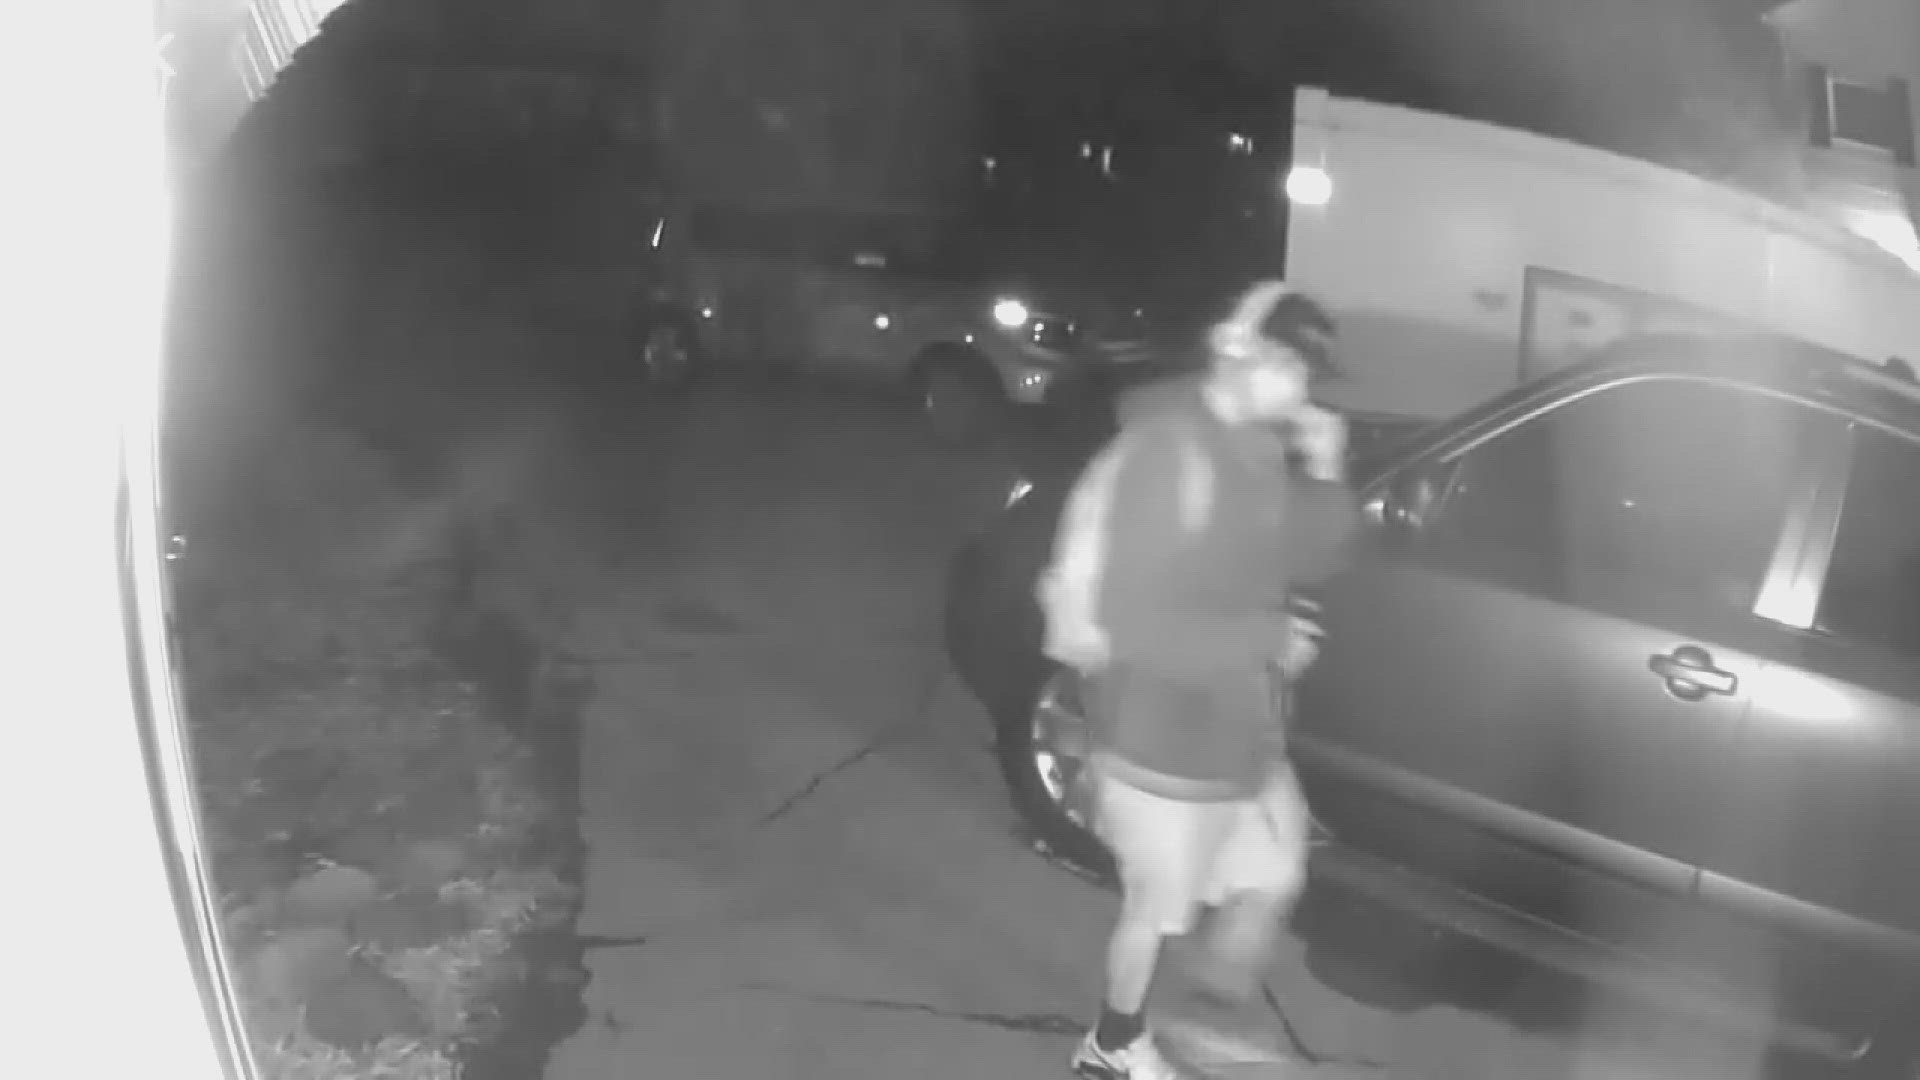 Over the past months, Paul Wells said there's been a car burglar on the loose in the Cedar Bluff and George Williams neighborhoods.